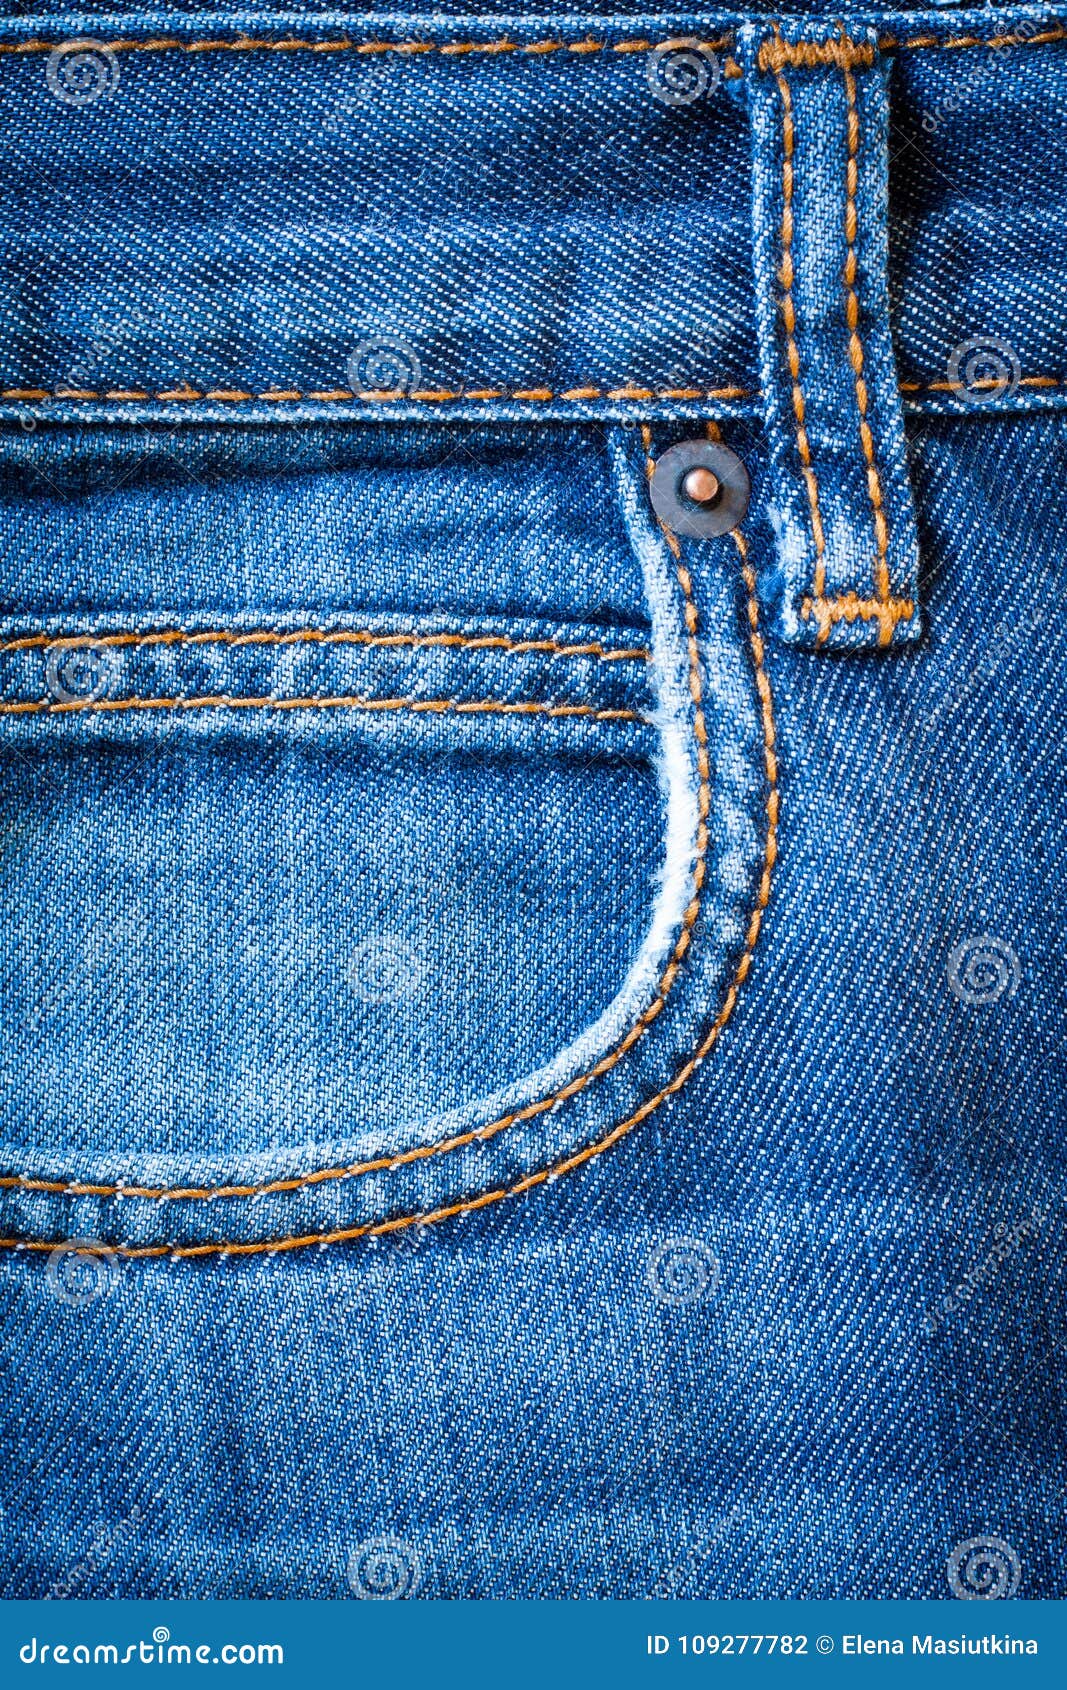 Jeans Fabric with Pocket and Seams for Design. Stock Photo - Image of ...